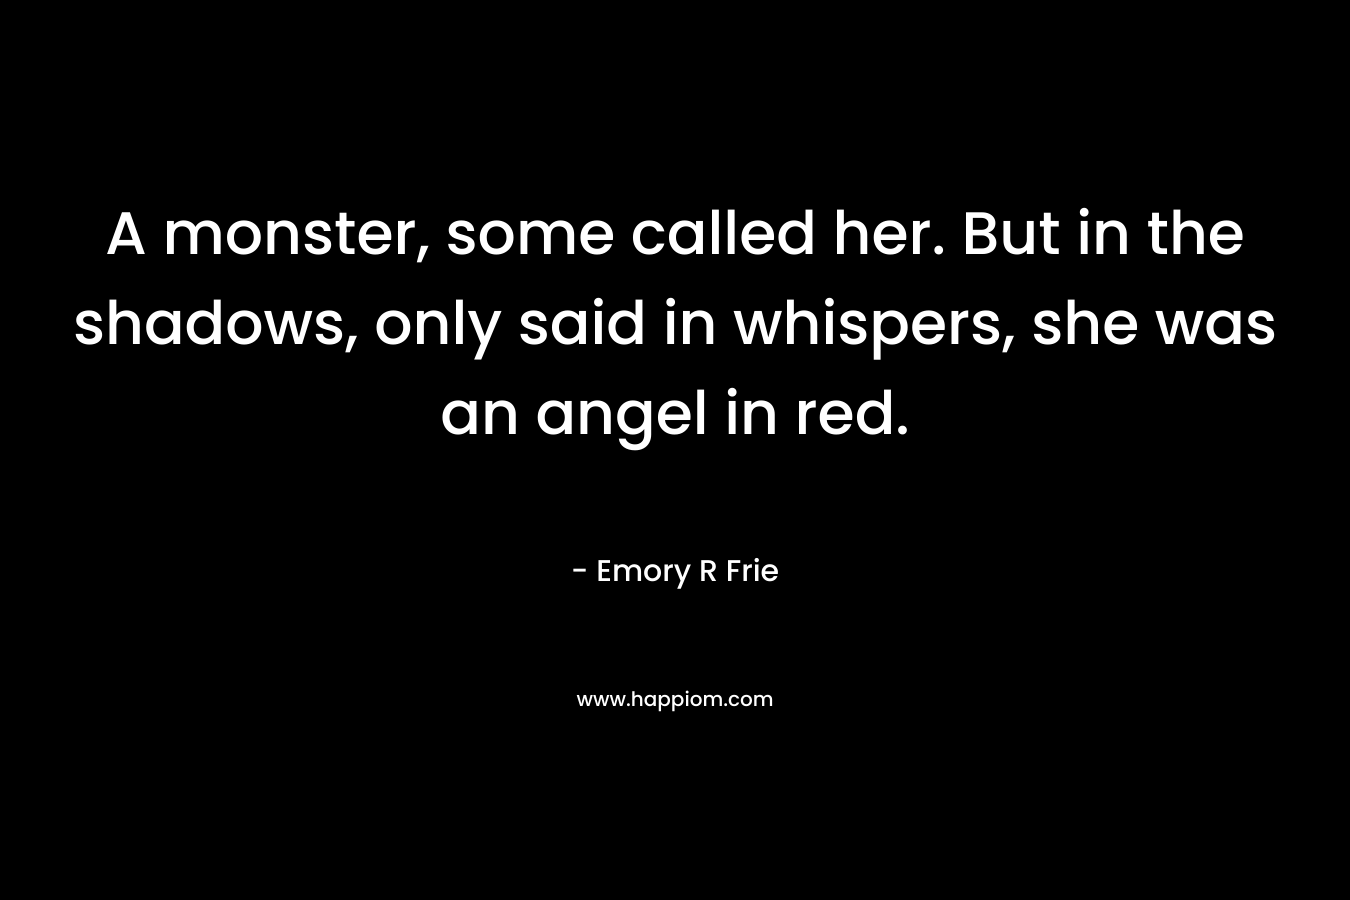 A monster, some called her. But in the shadows, only said in whispers, she was an angel in red.